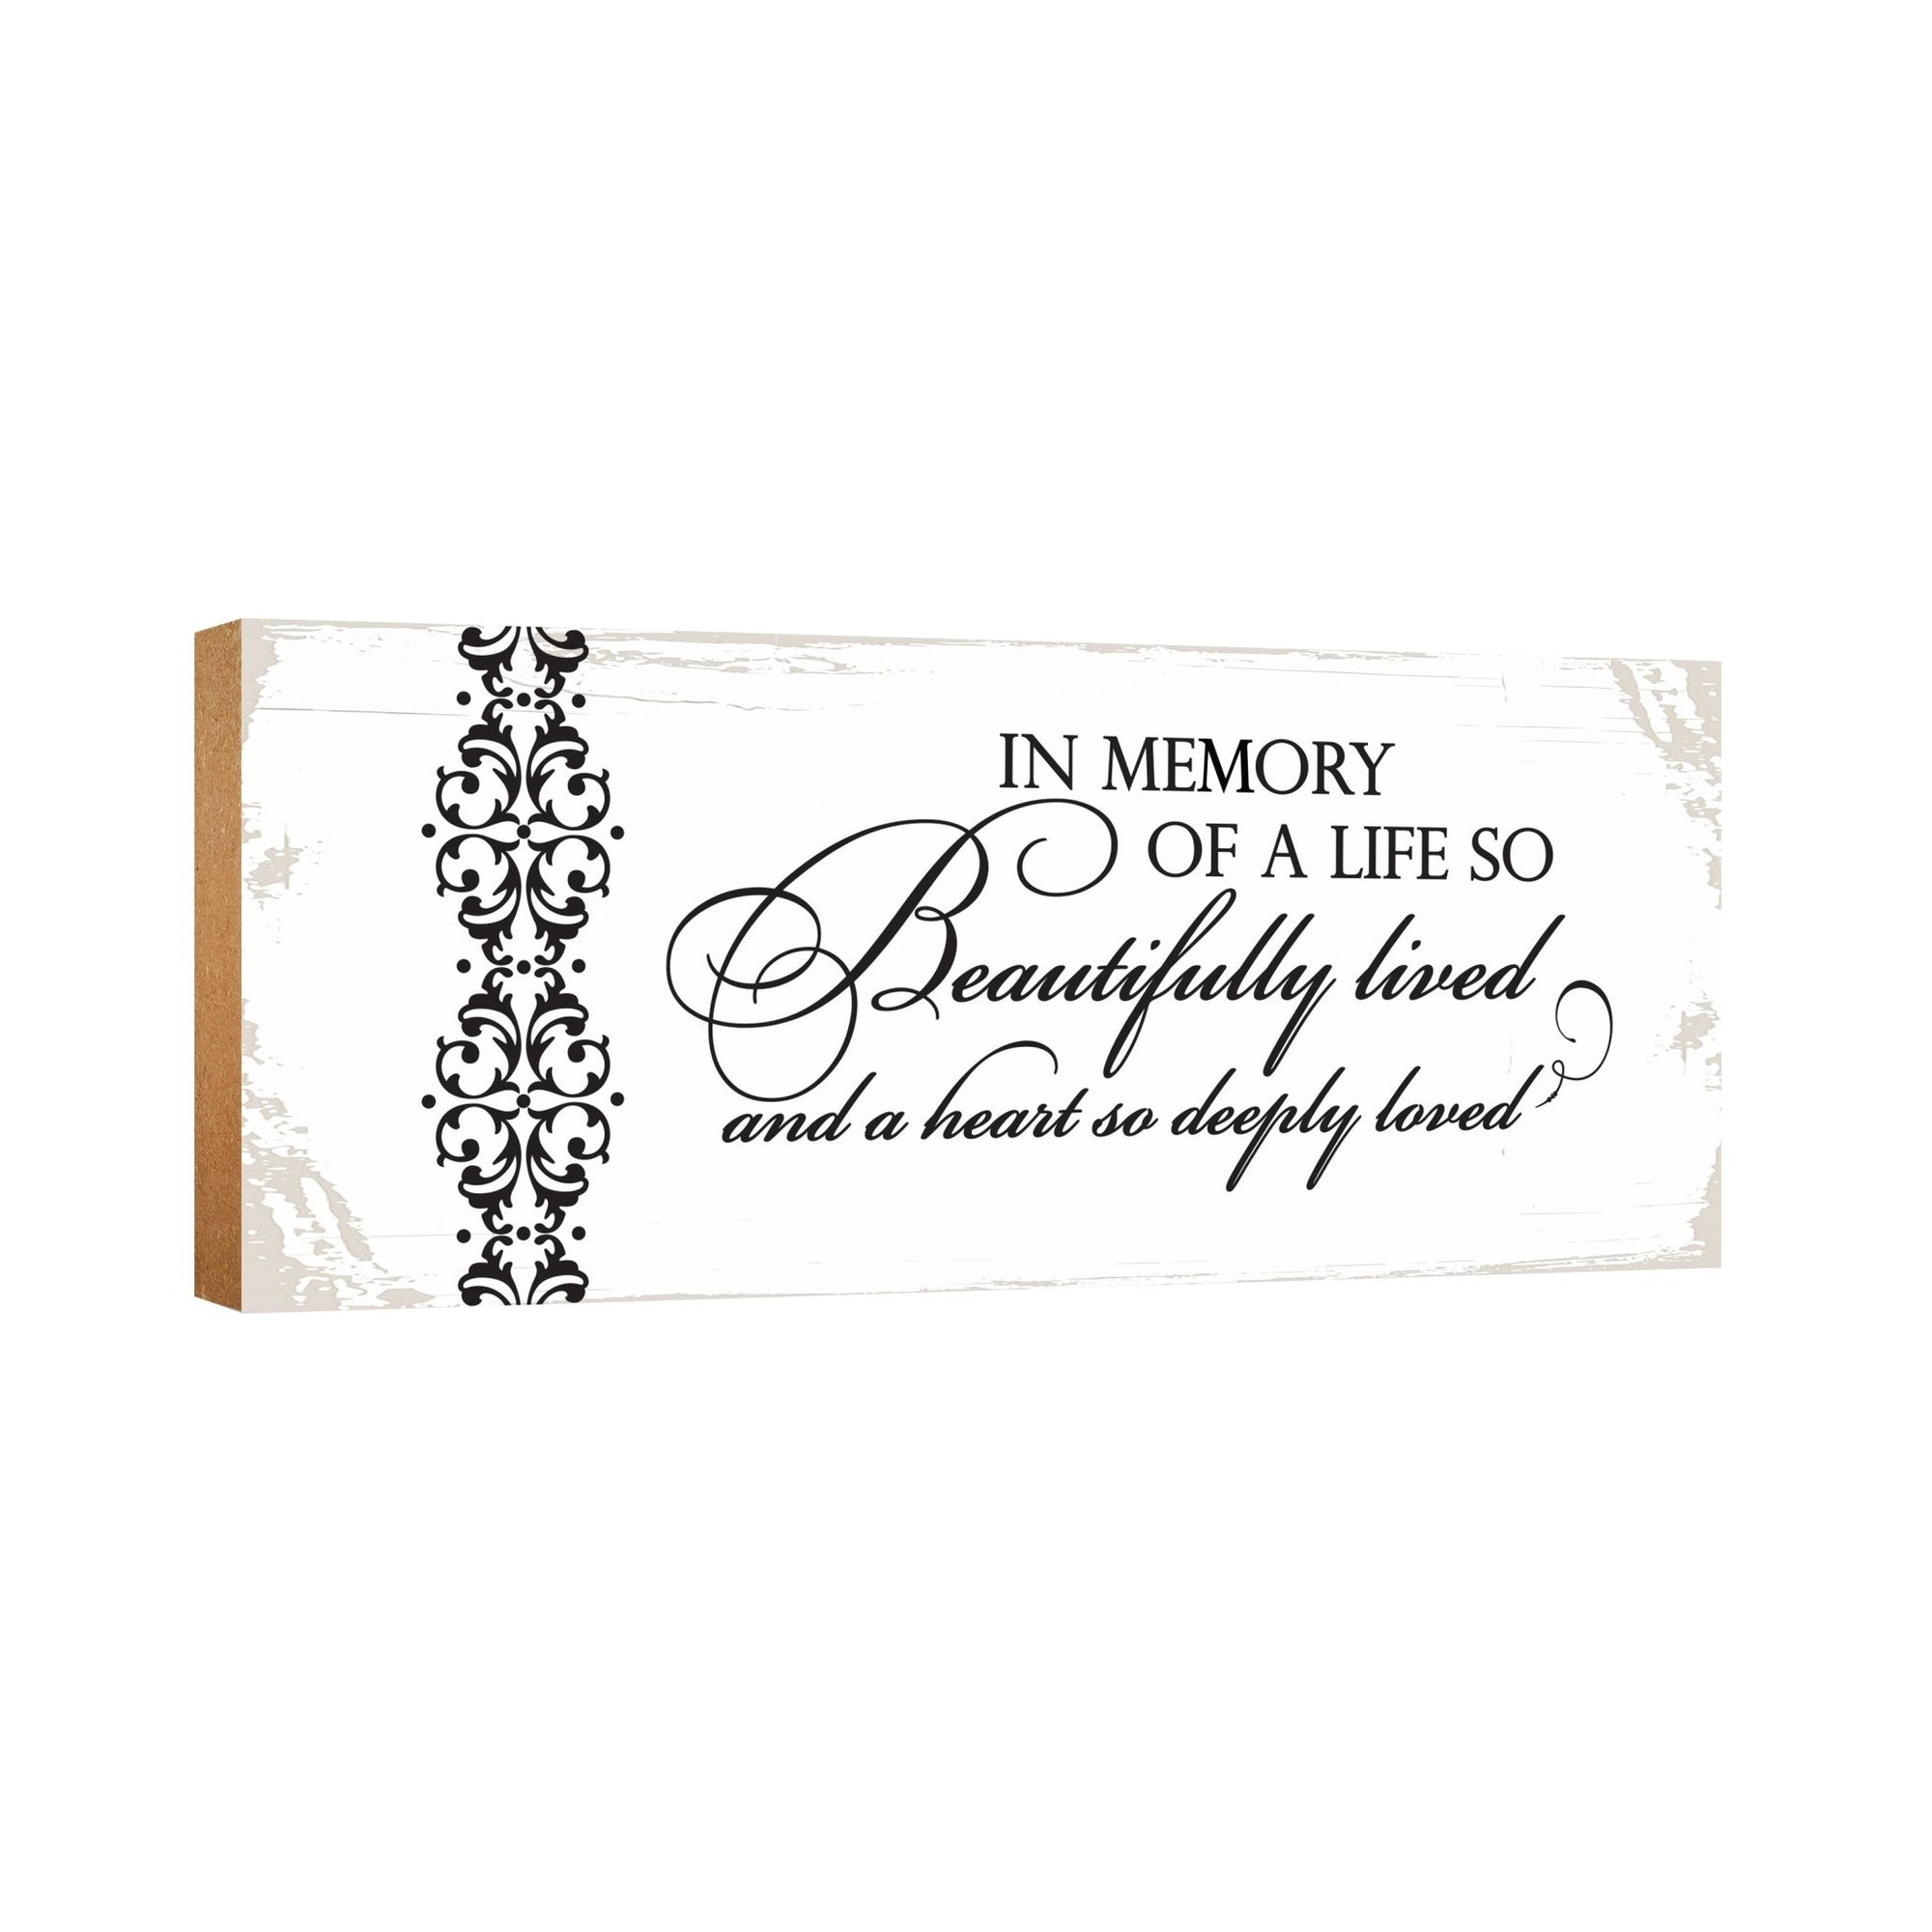 Modern Inspirational Pet Memorial 4x10 inches Wooden Sign (In Memory Of Life) Tabletop Plaque Home Decoration Loss of Pet Bereavement Sympathy Keepsake - LifeSong Milestones